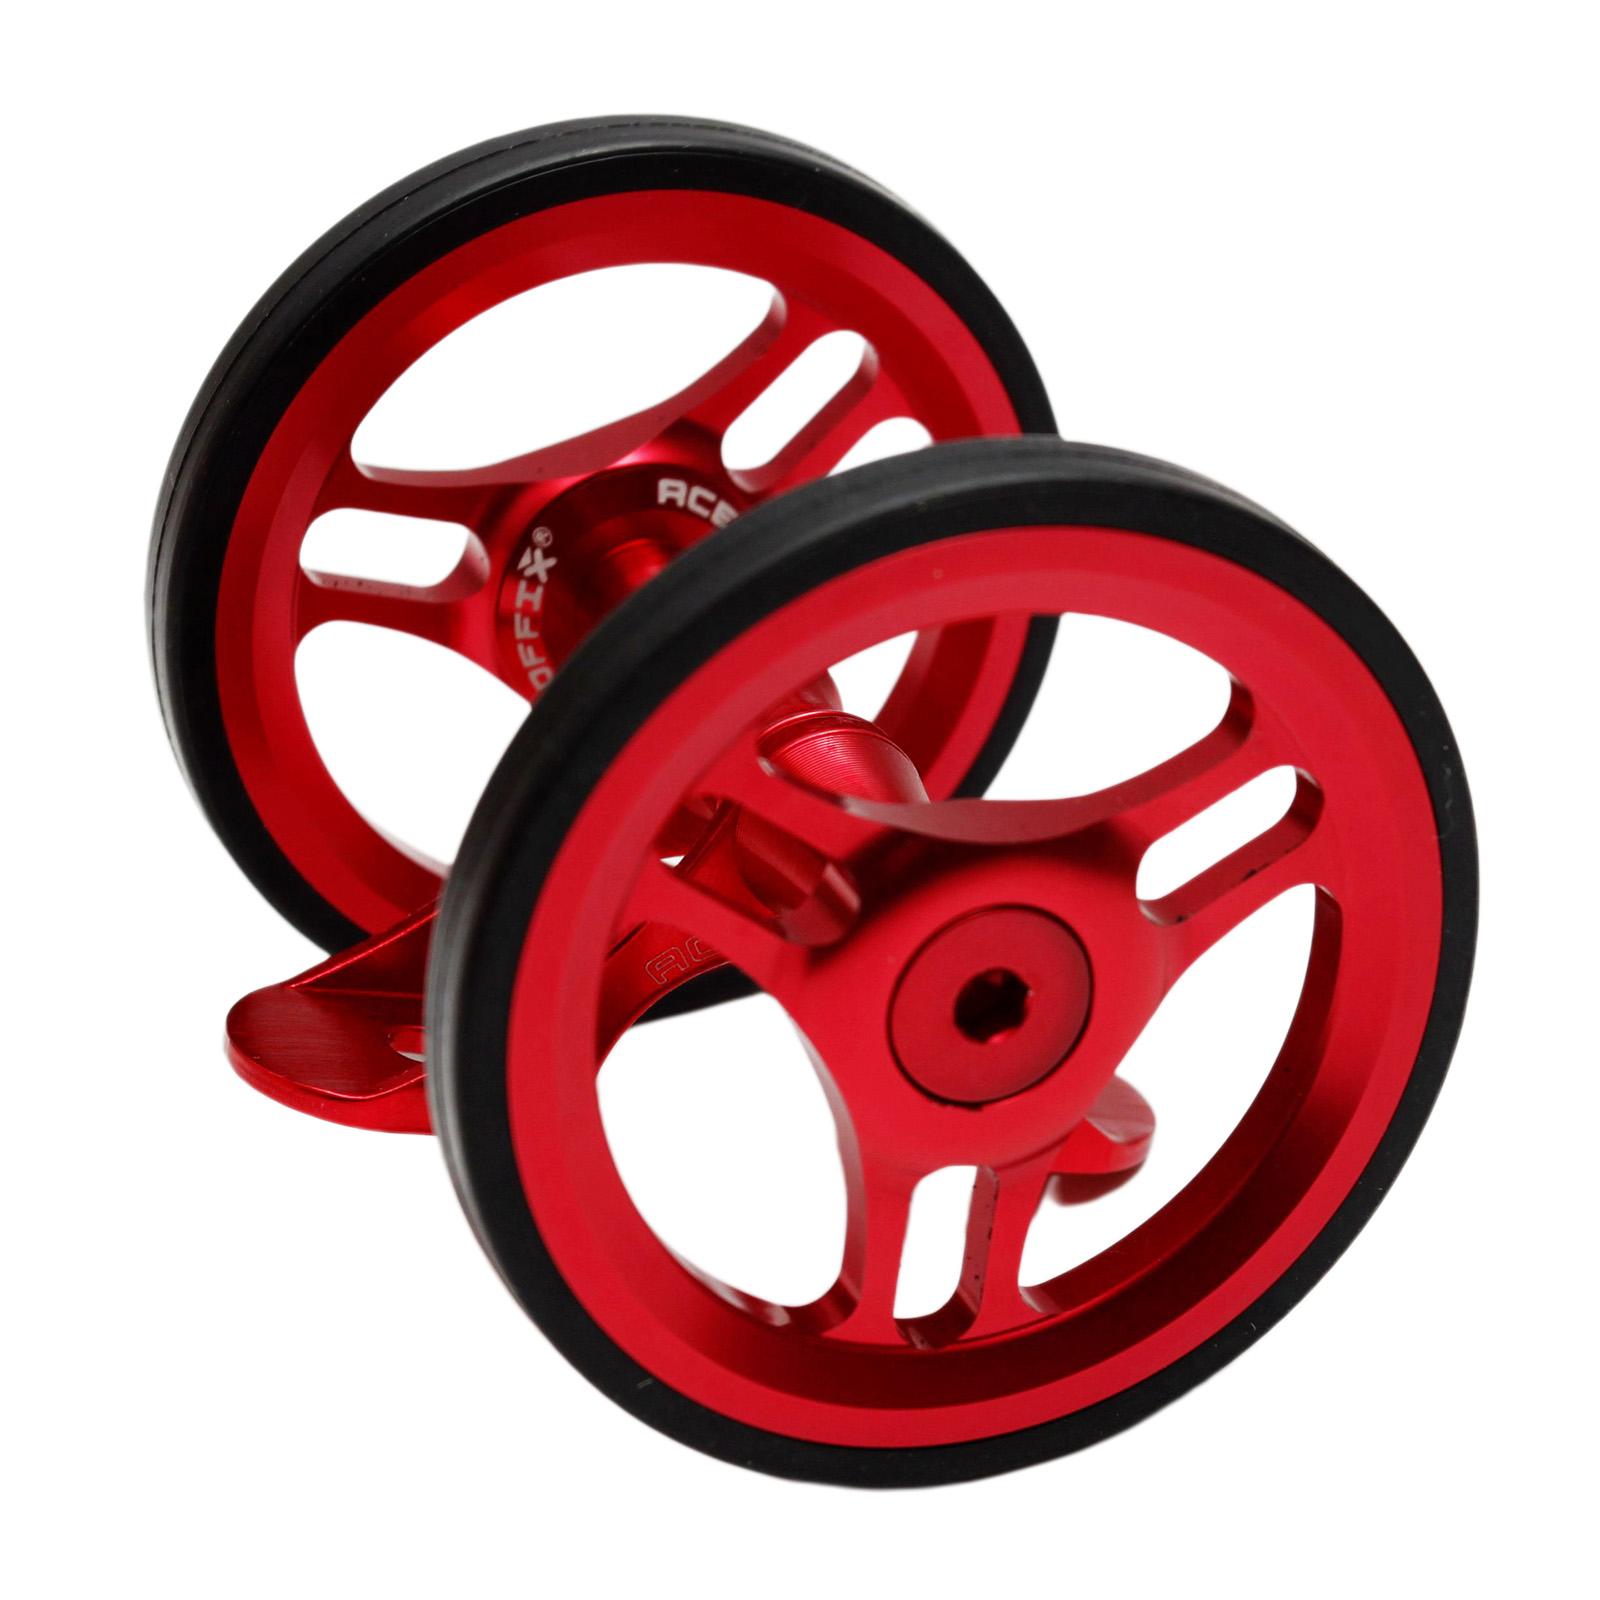 Folding Bike Easy Wheel Bicycle Mudguard for Bicycle Outdoors red